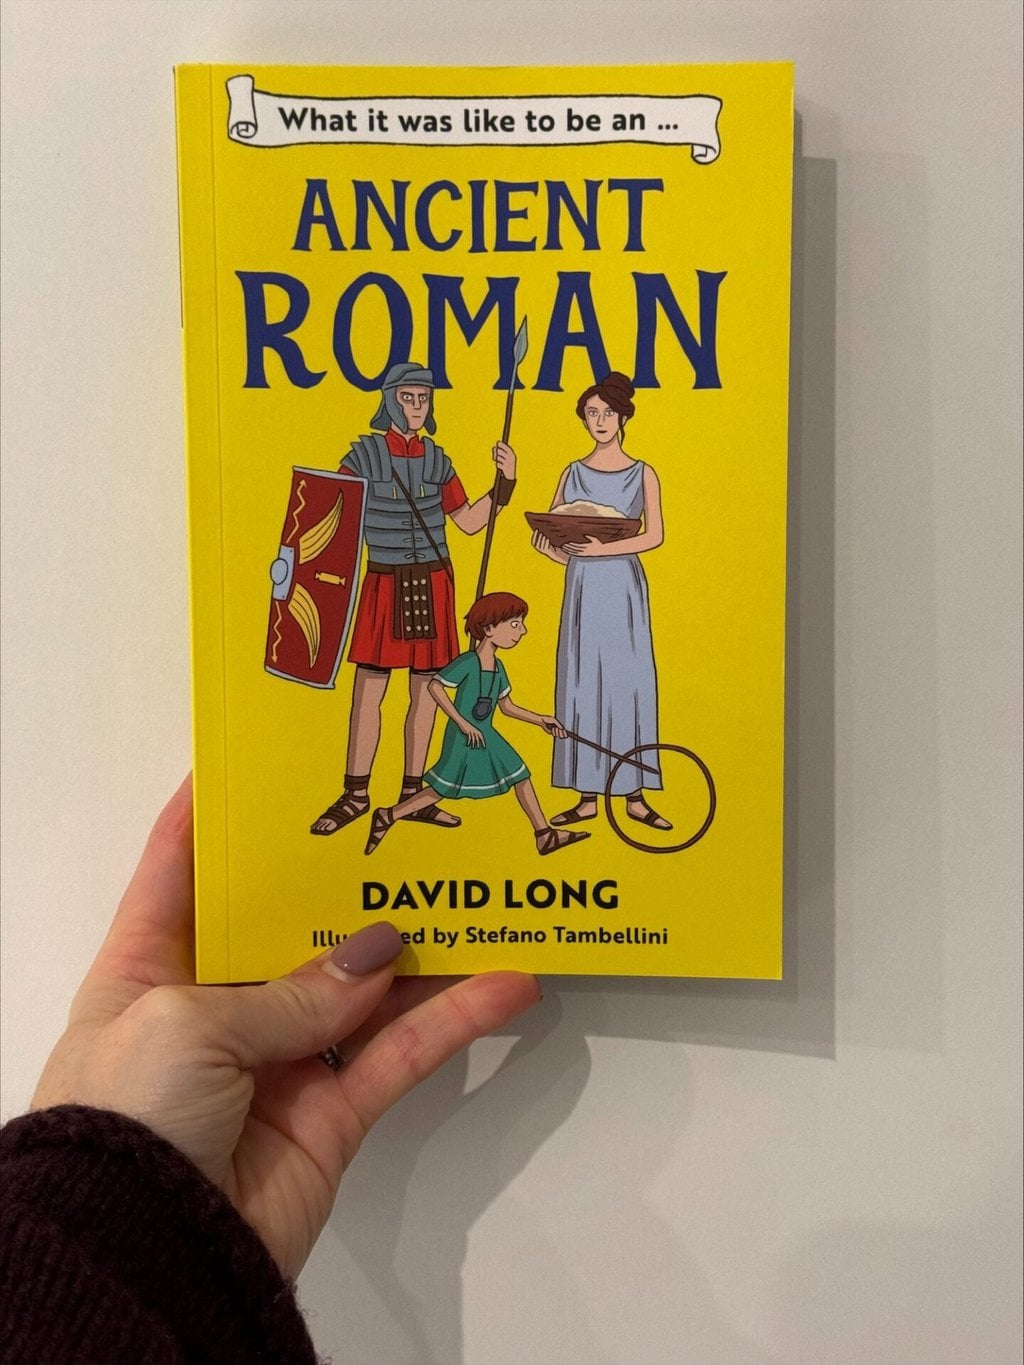 What was it like to be an ANCIENT ROMAN